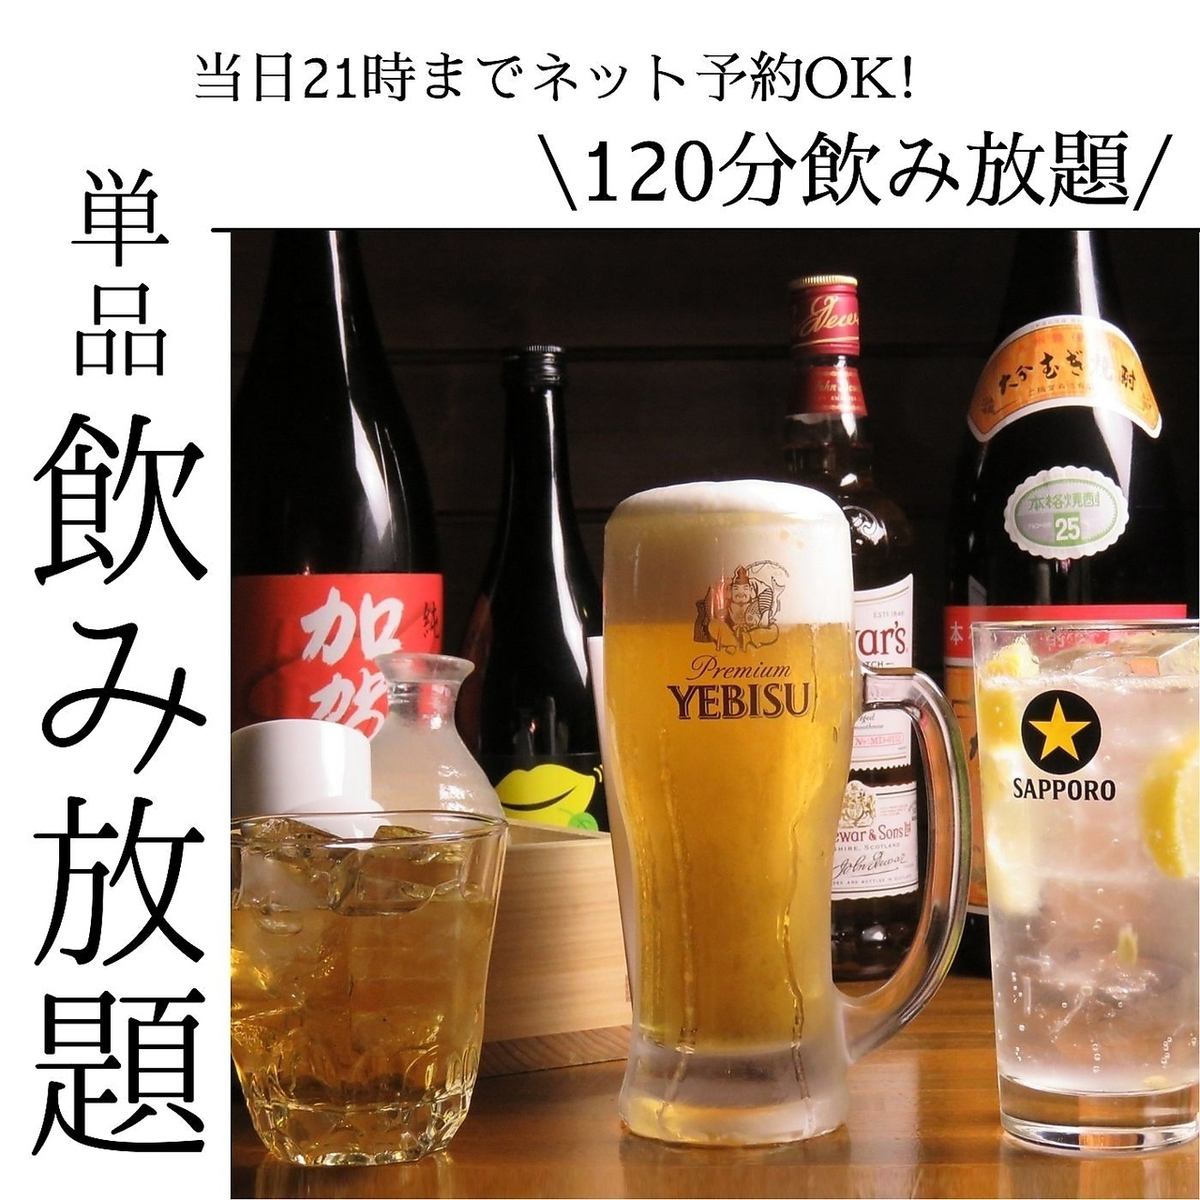 Single item all-you-can-drink 2,000 yen (tax included)